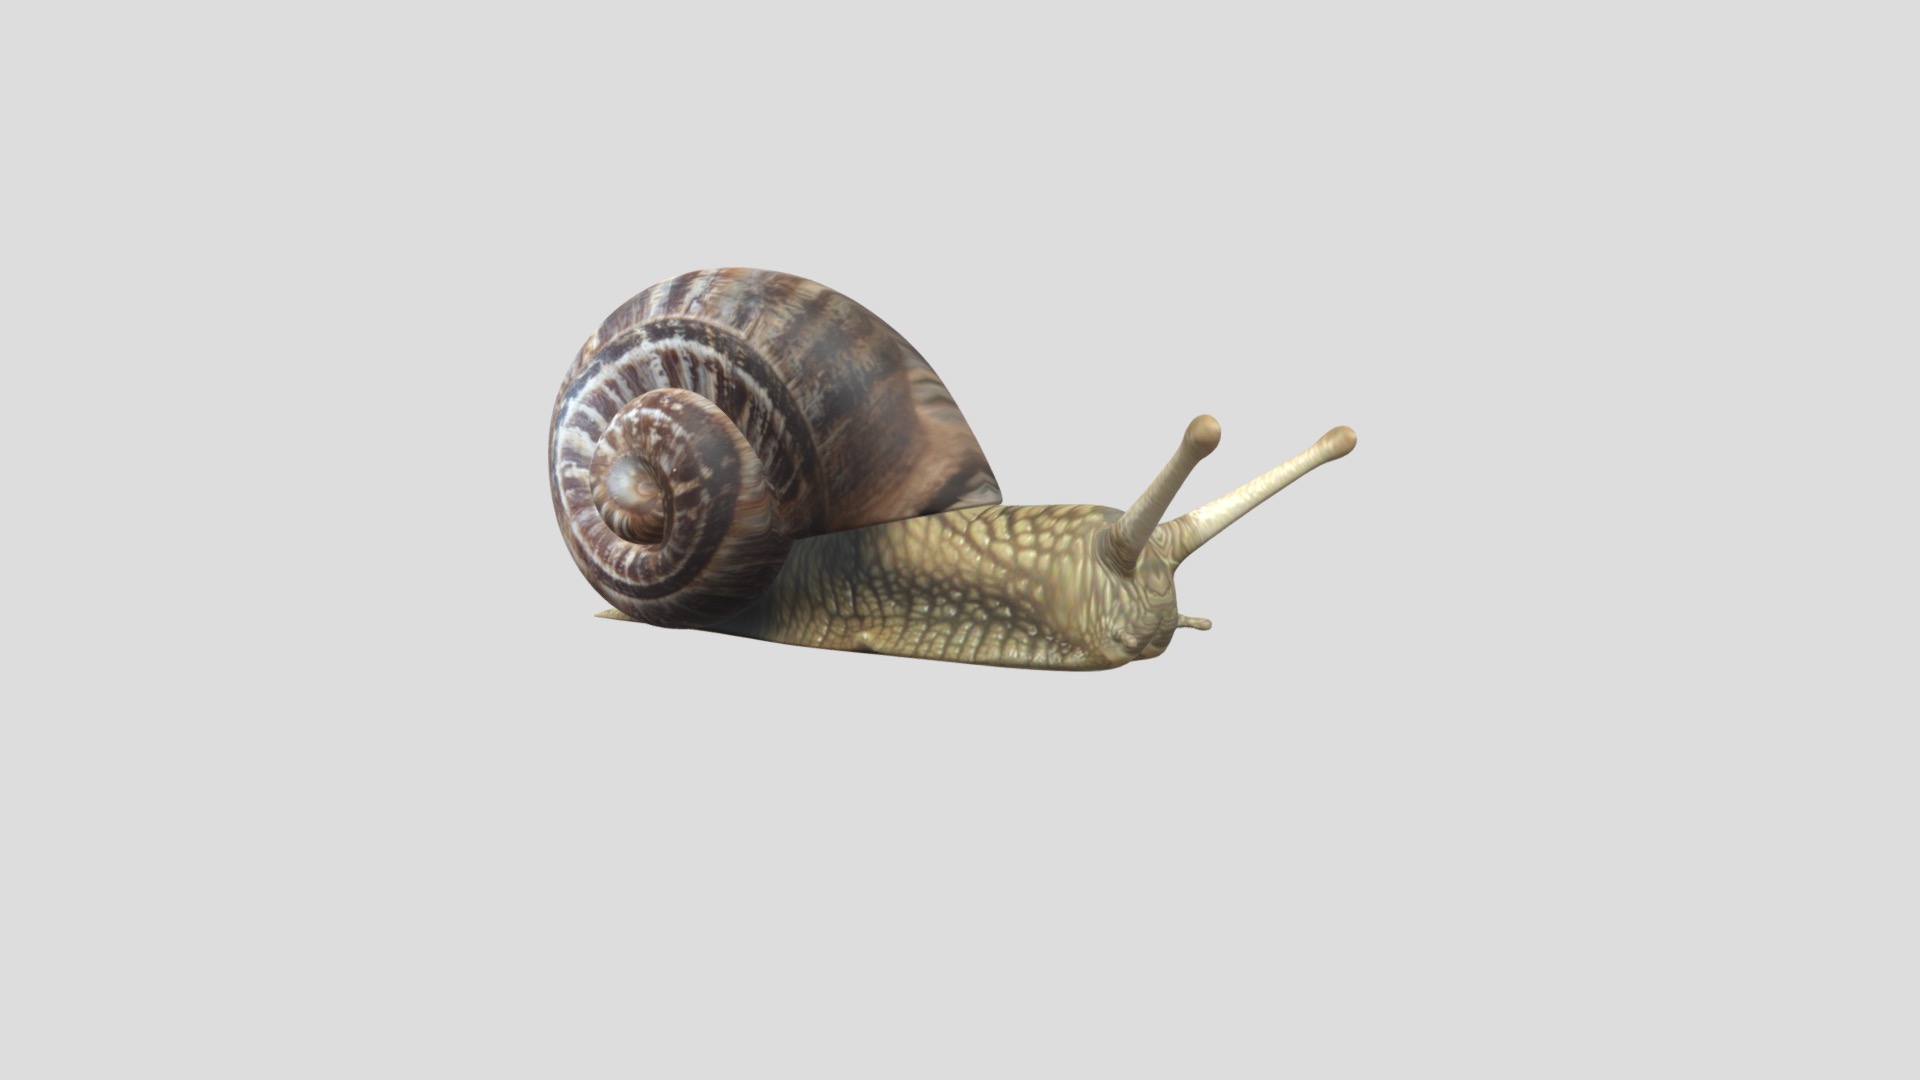 3D model Snail - This is a 3D model of the Snail. The 3D model is about a snail on a white background.